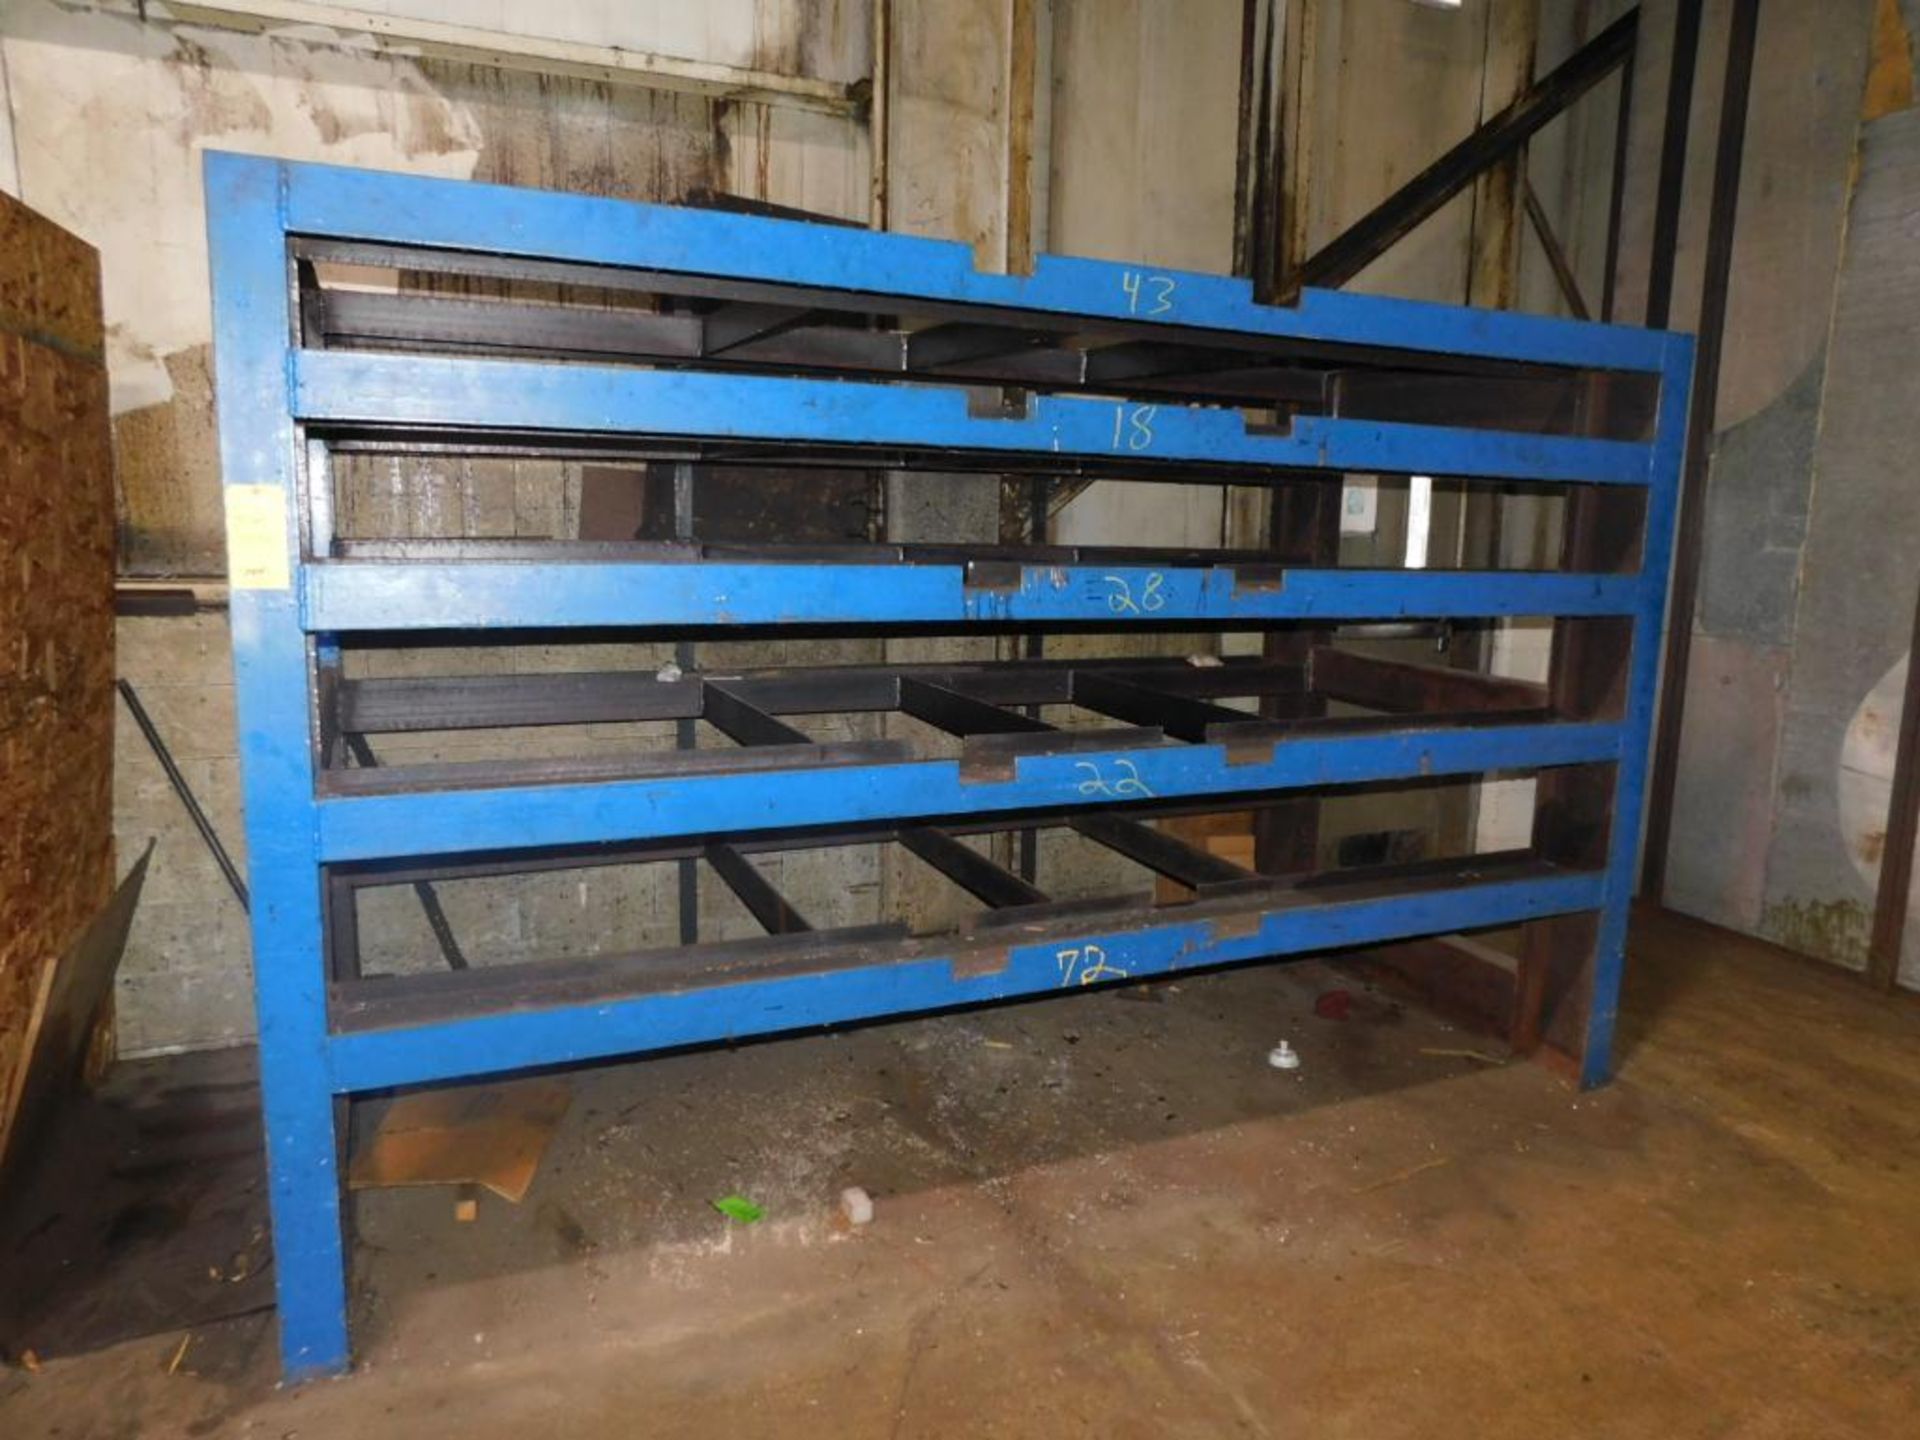 LOT: (16) Shelves, (1) Section of 7' x 6' x 24" Racking, Wood Table, 80" H x 120" W x 60" D Heavy Du - Image 7 of 11